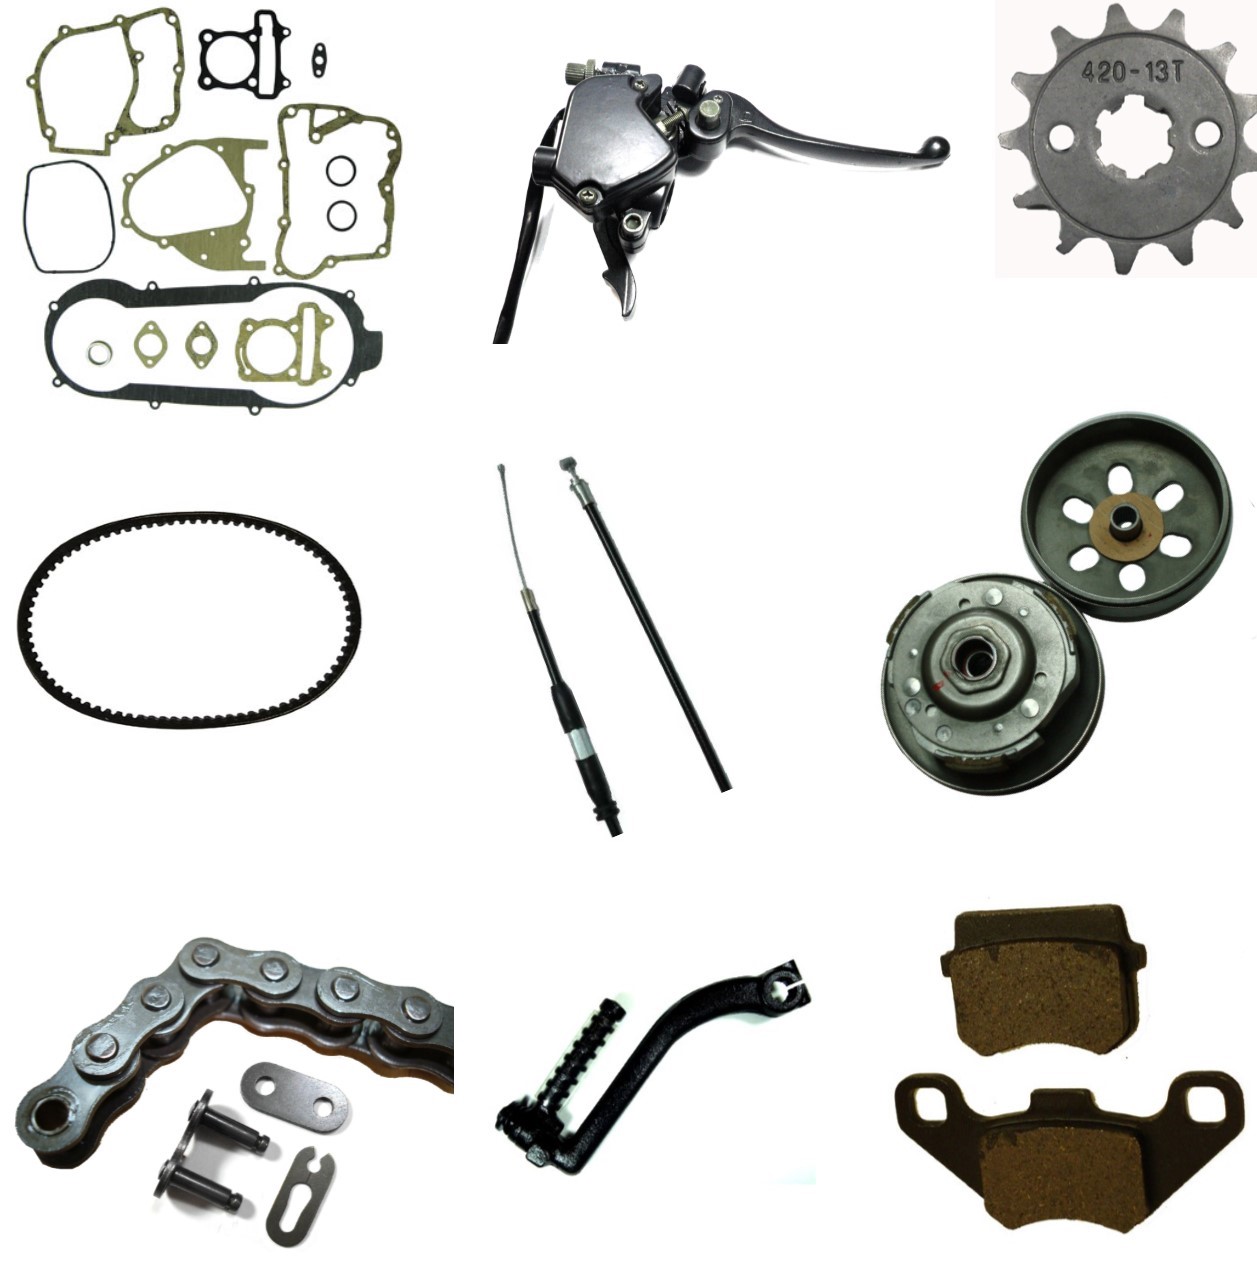 Other Common Parts